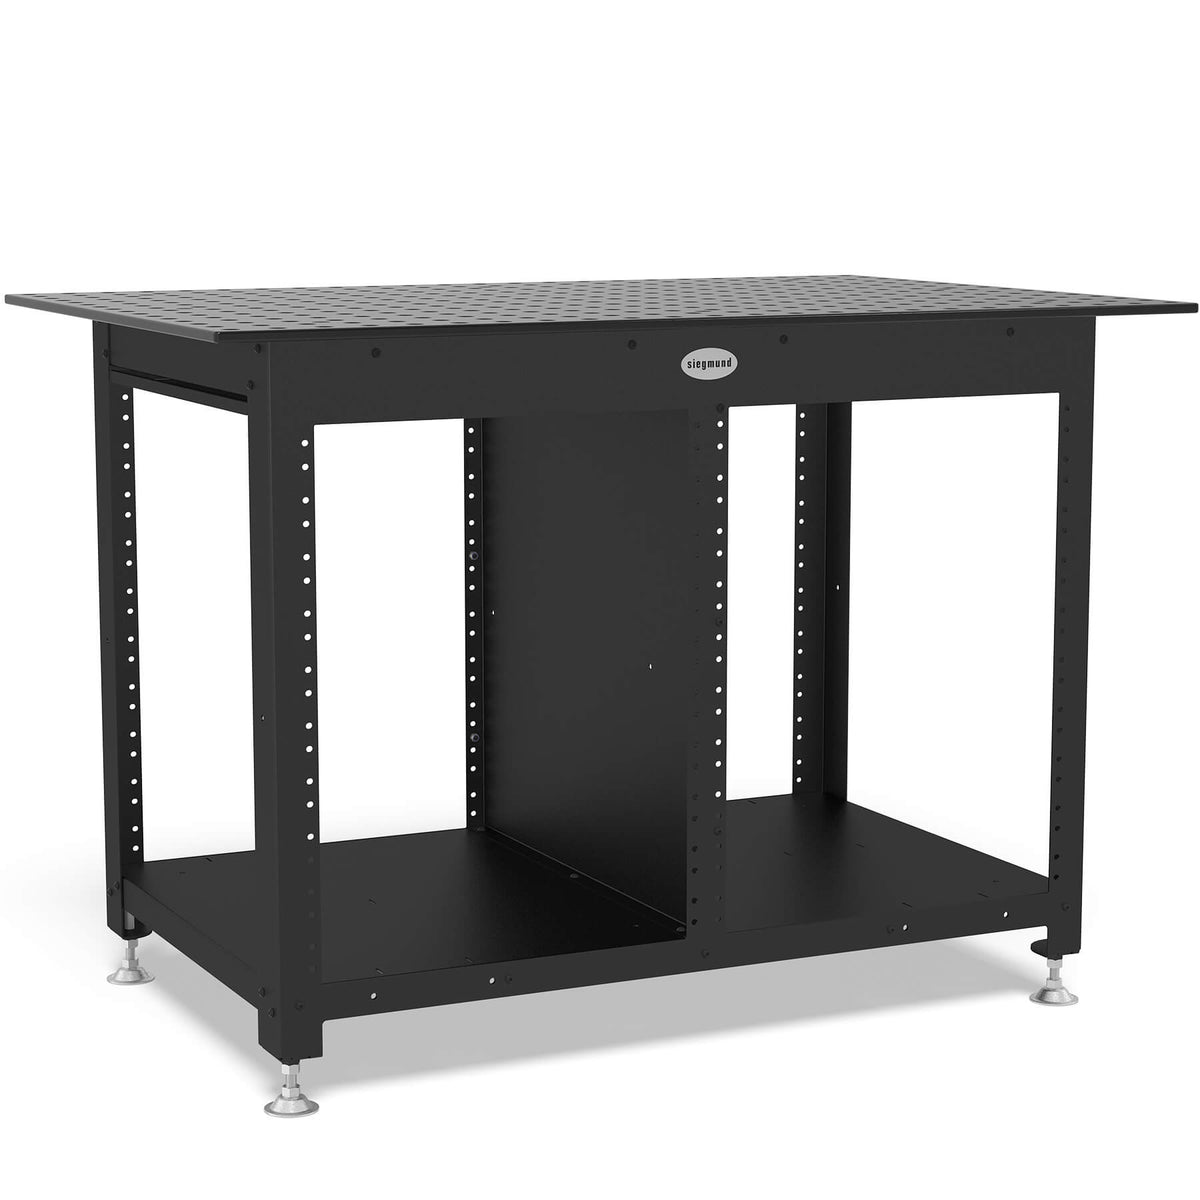 US164400: System 16 Workstation Including 2.8'x4' (32"x48") Perforated Plate (Siegmund Imperial Series)